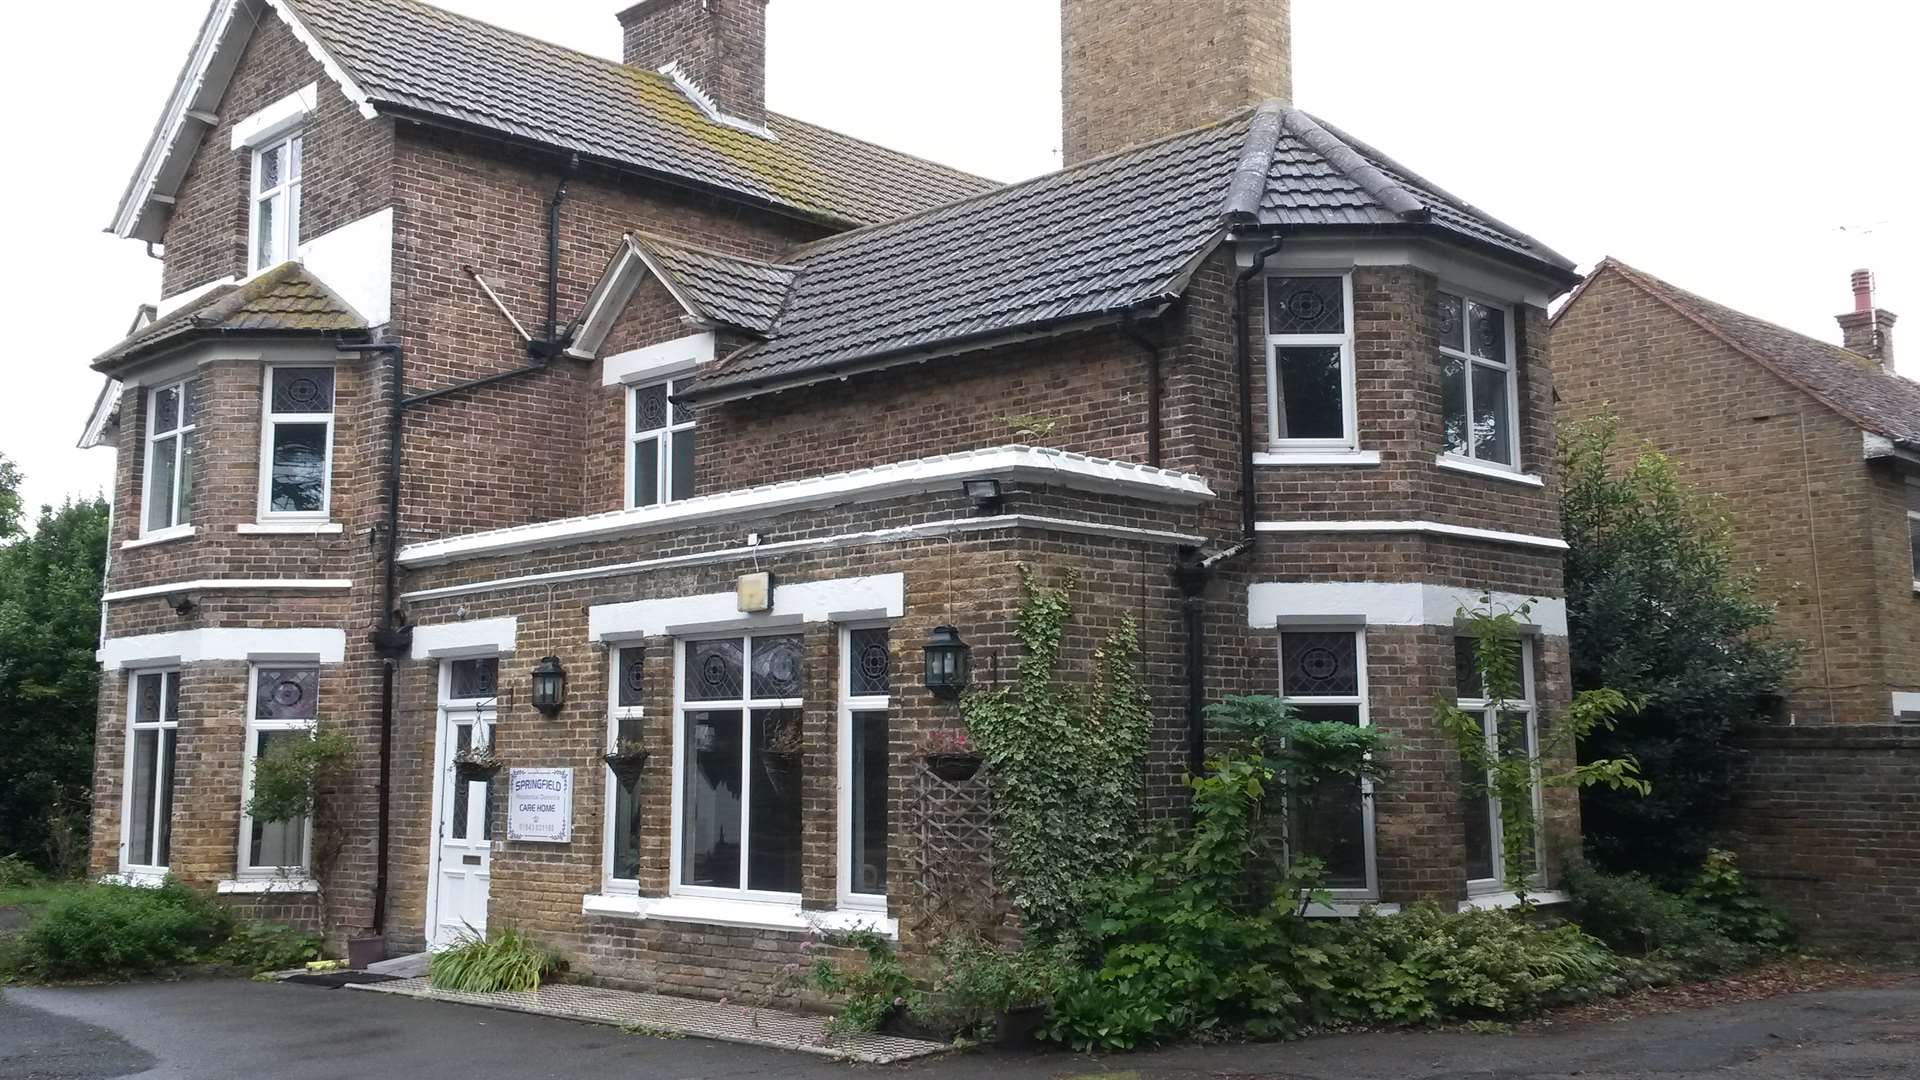 Springfield Residential Home